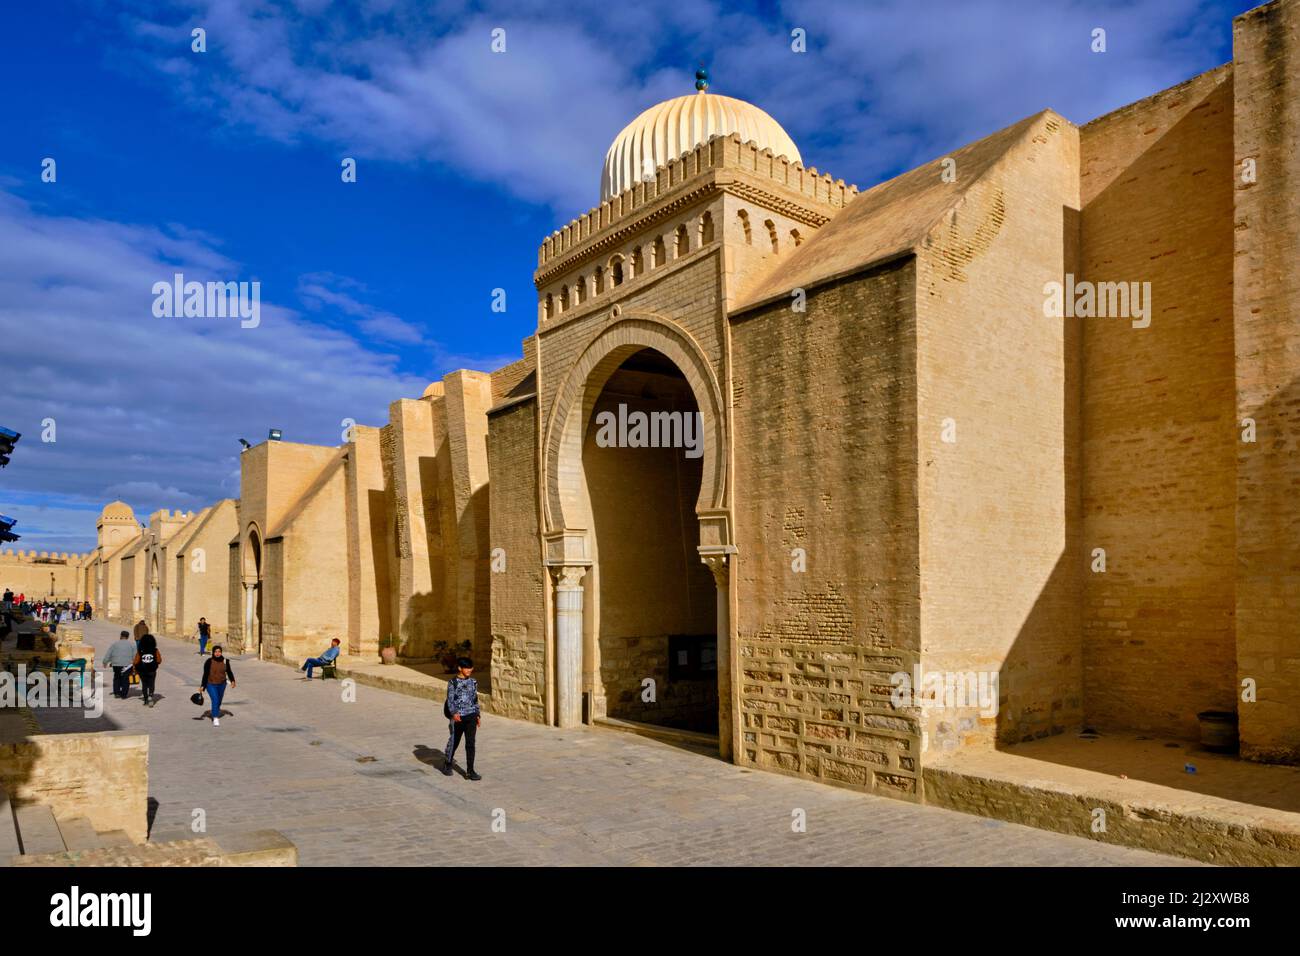 Tunisia, Kairouan, holy city, listed as World Heritage by UNESCO, the Great Mosque Stock Photo